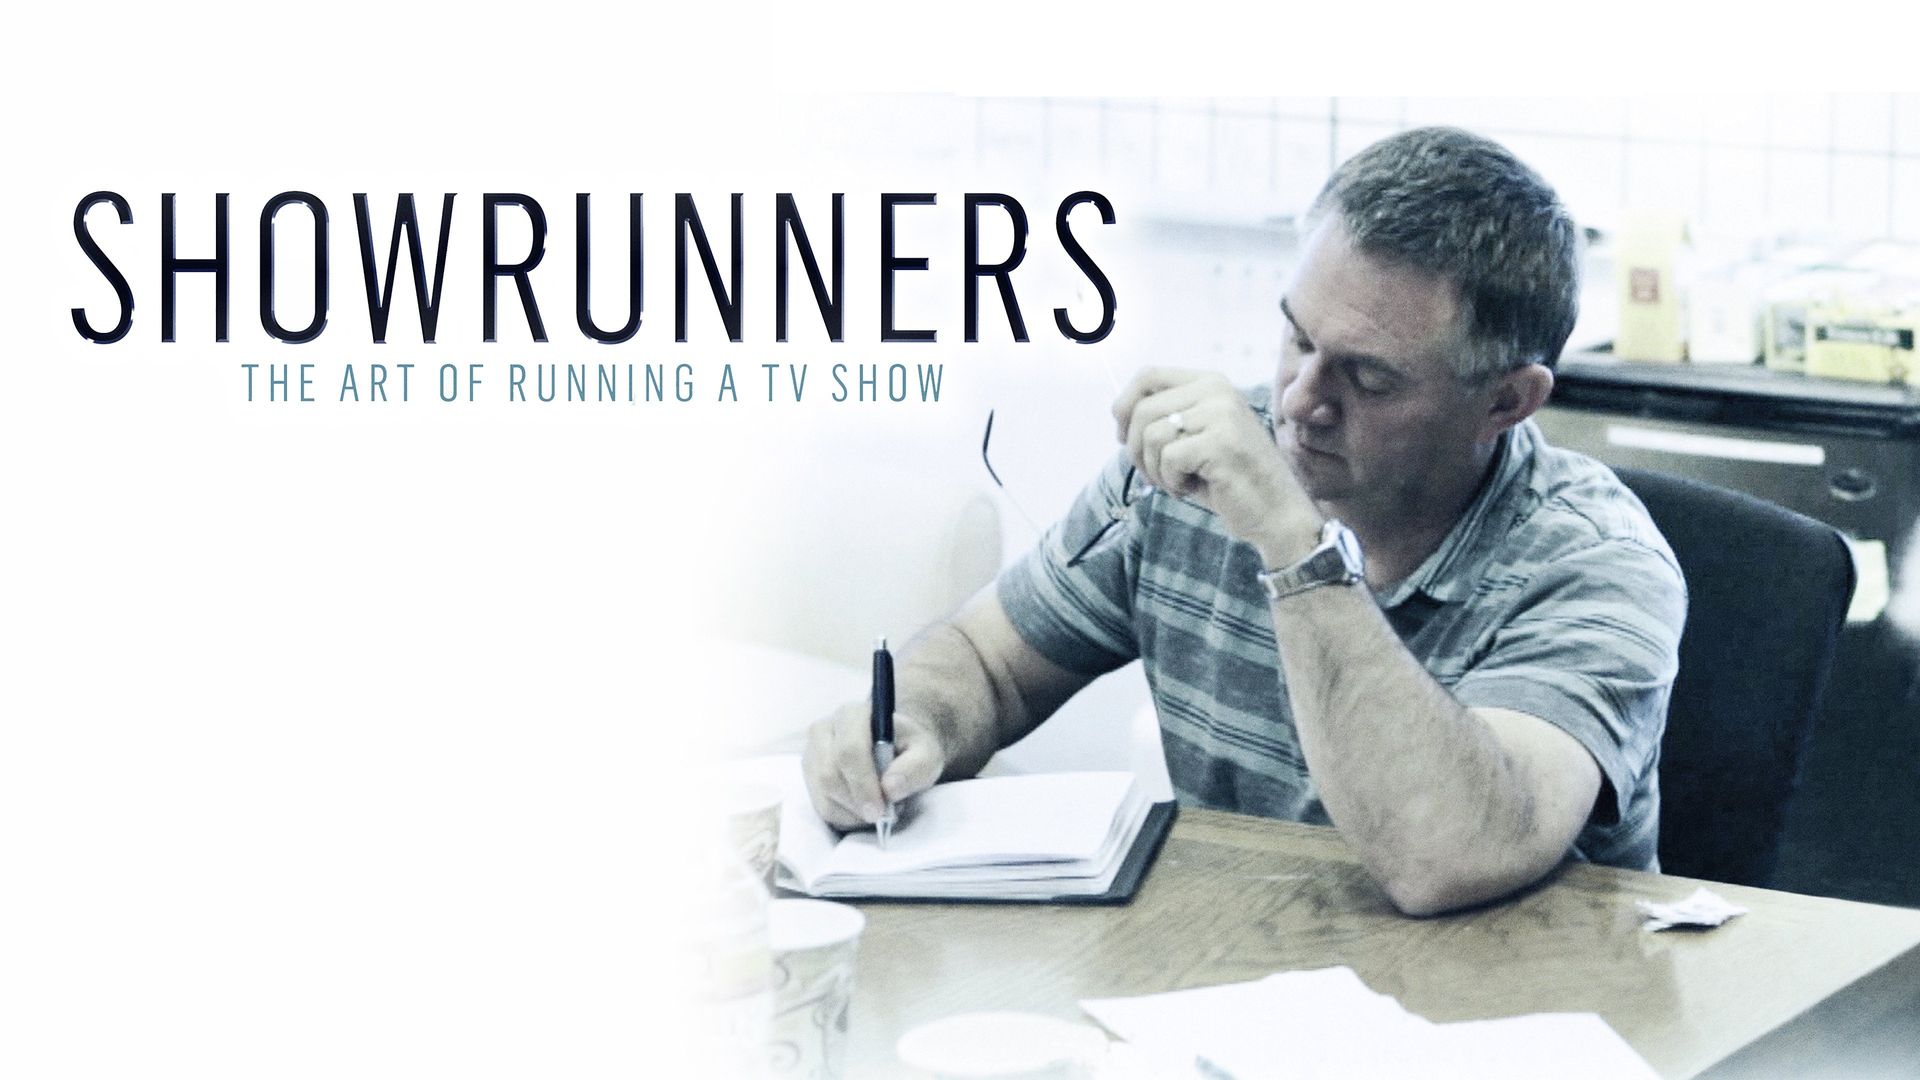 Showrunners: The Art of Running a TV Show Backdrop